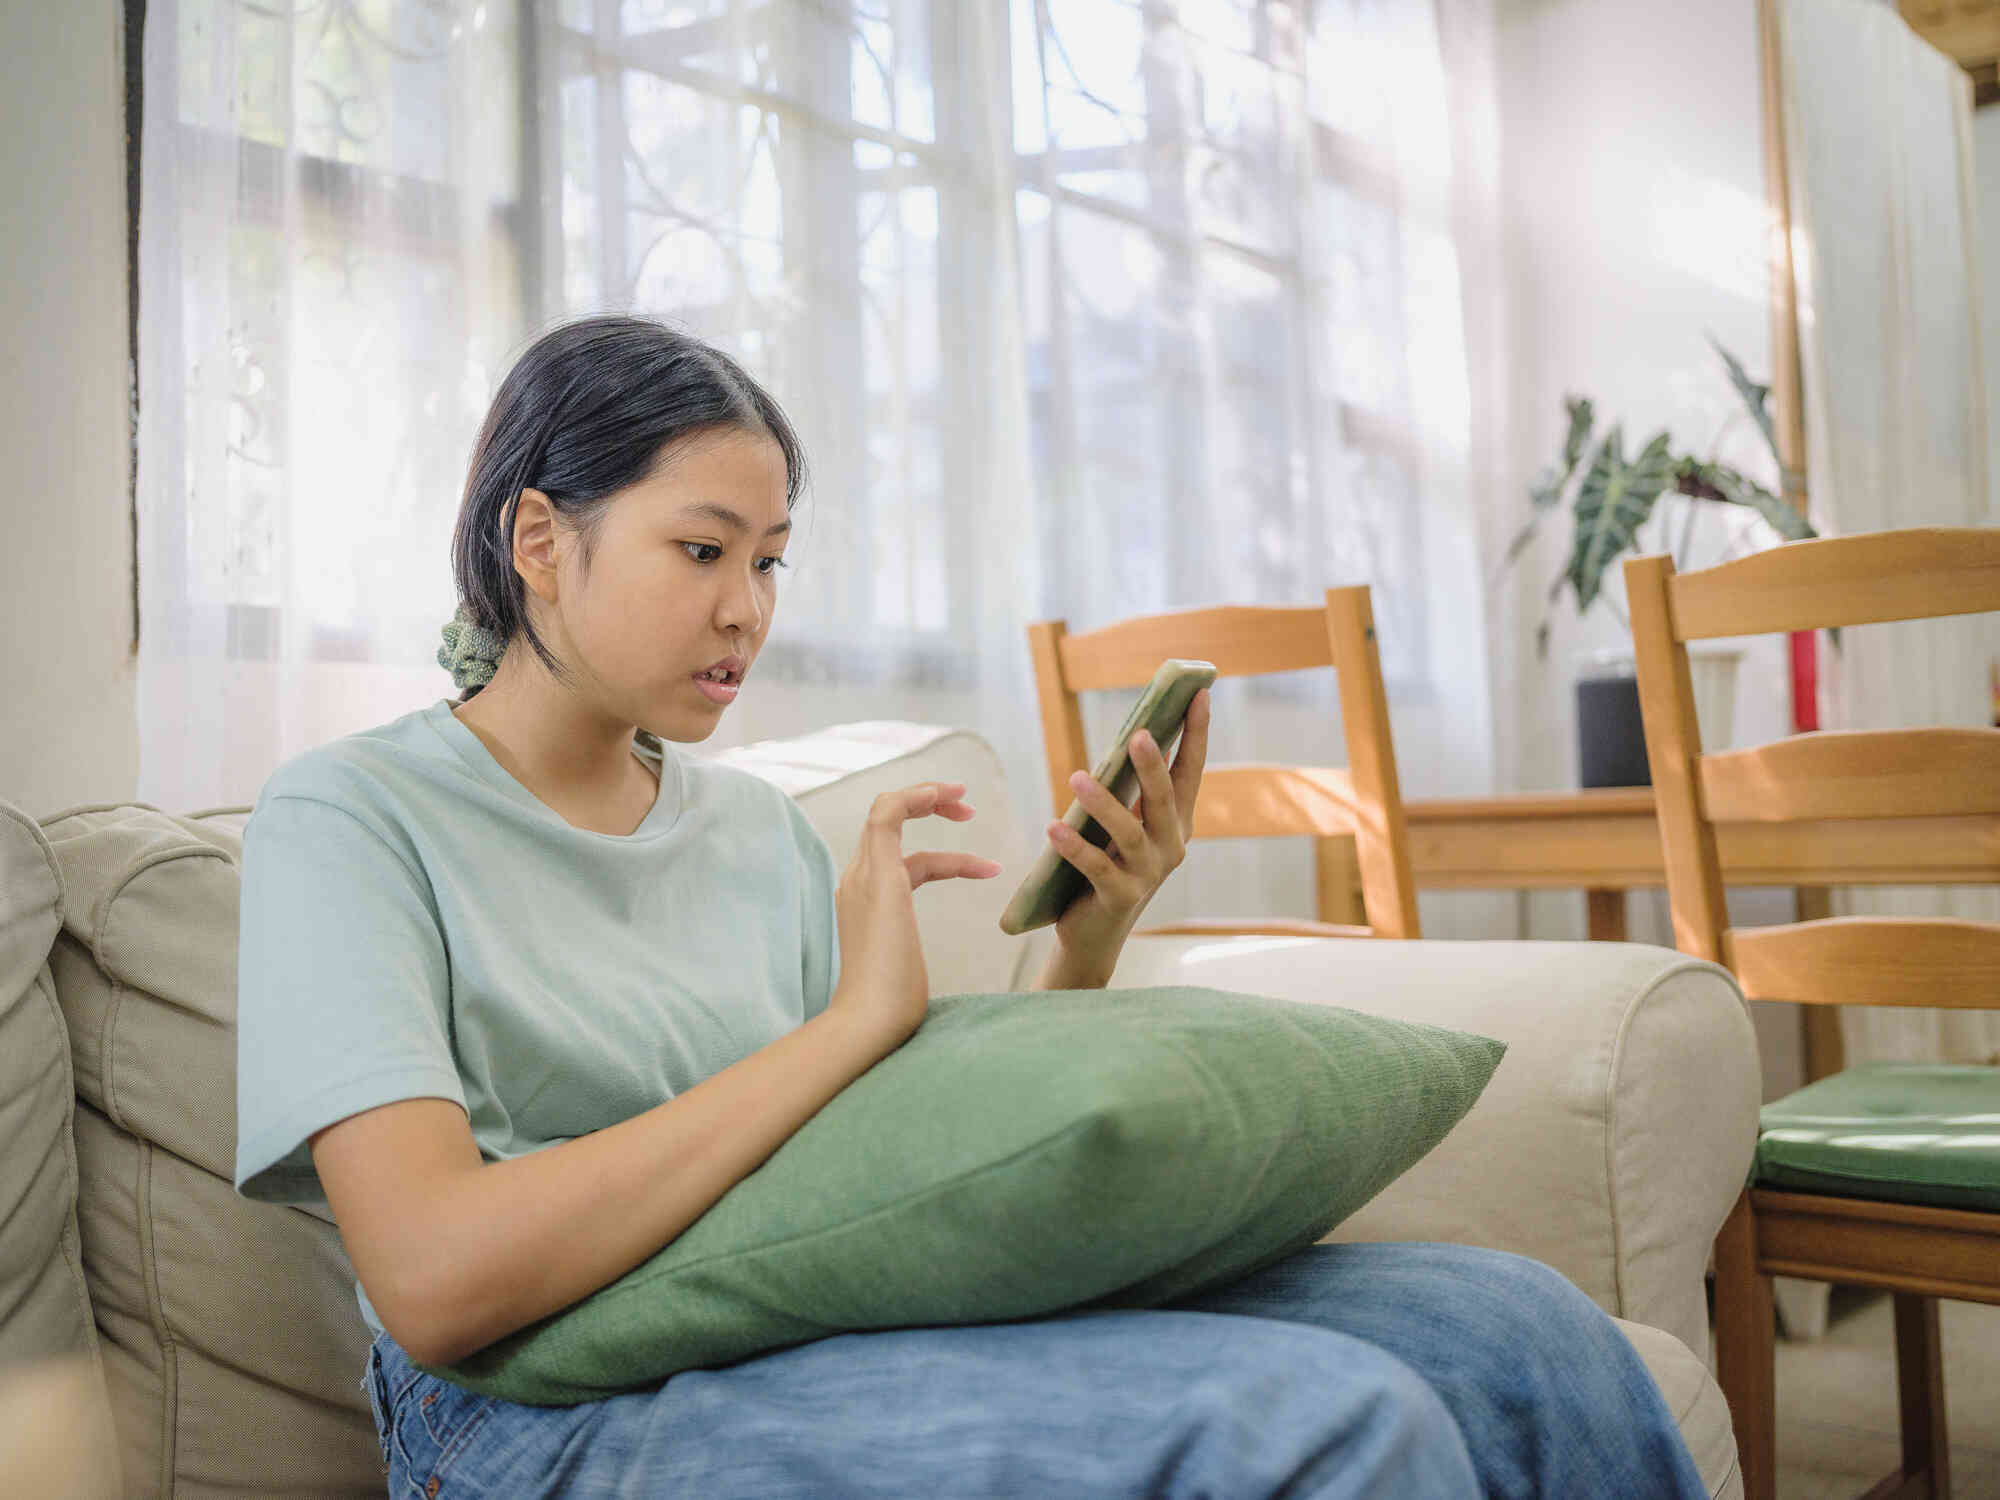 A teen girl sits on the couch with a green pillow in her lap and looks at the cellphone in her hand with a worried expression.